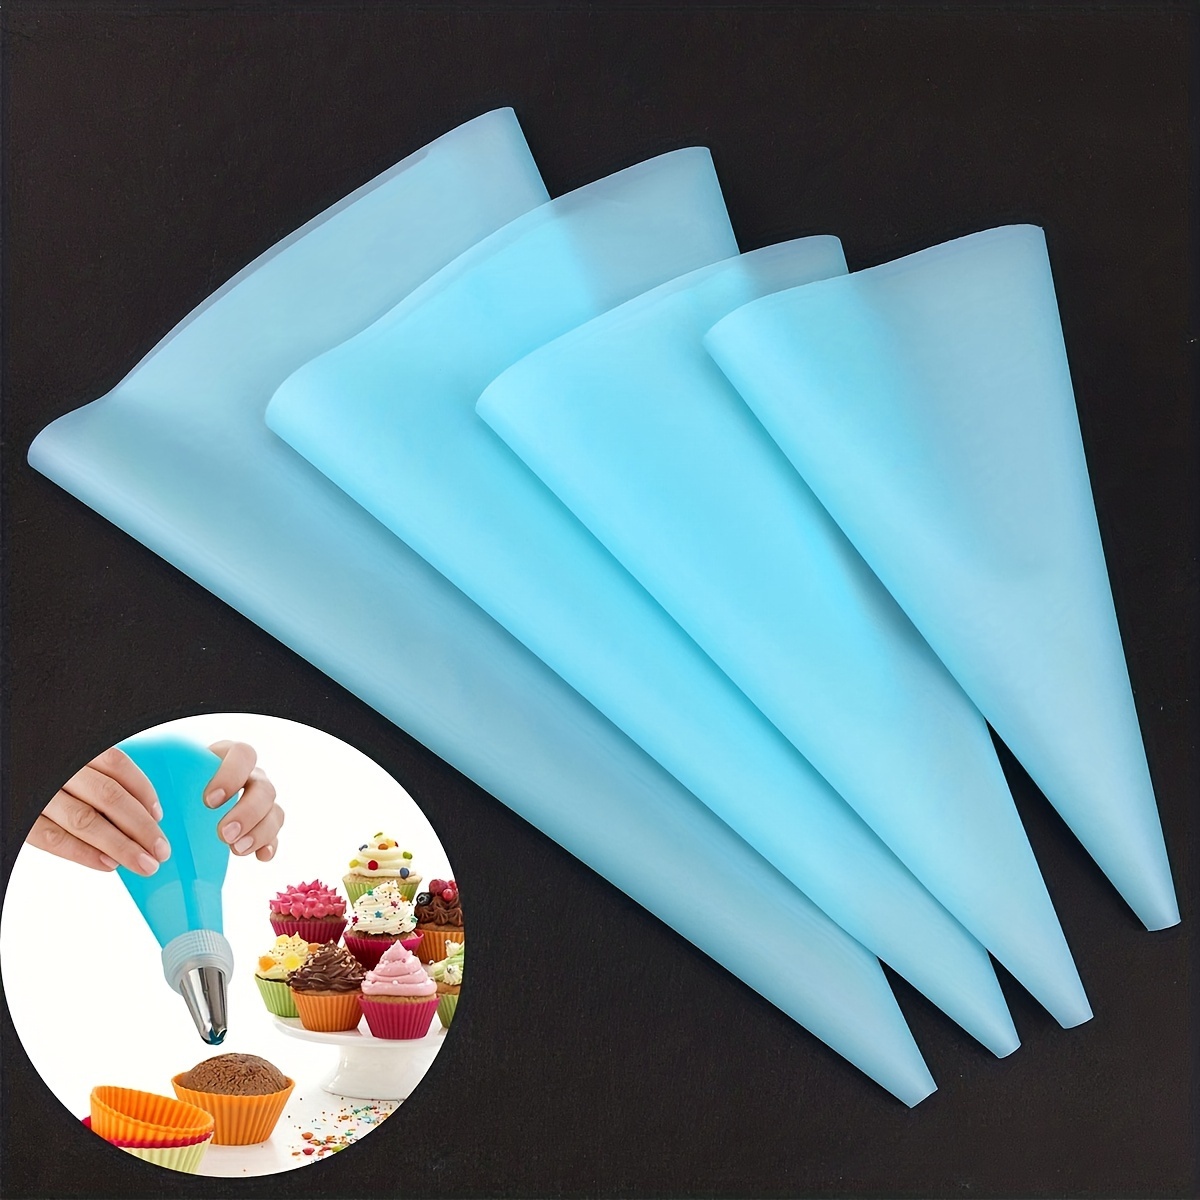 

4pcs Blue Cake Decorating Cream Bag, Piping Bag, Icing Bag, Baking Decorating Tools, Cake Decorating Tools, Baking Supplies For Chocolate Cupcake, Icing Cream Frosting Bags, Diy Kitchen Tool